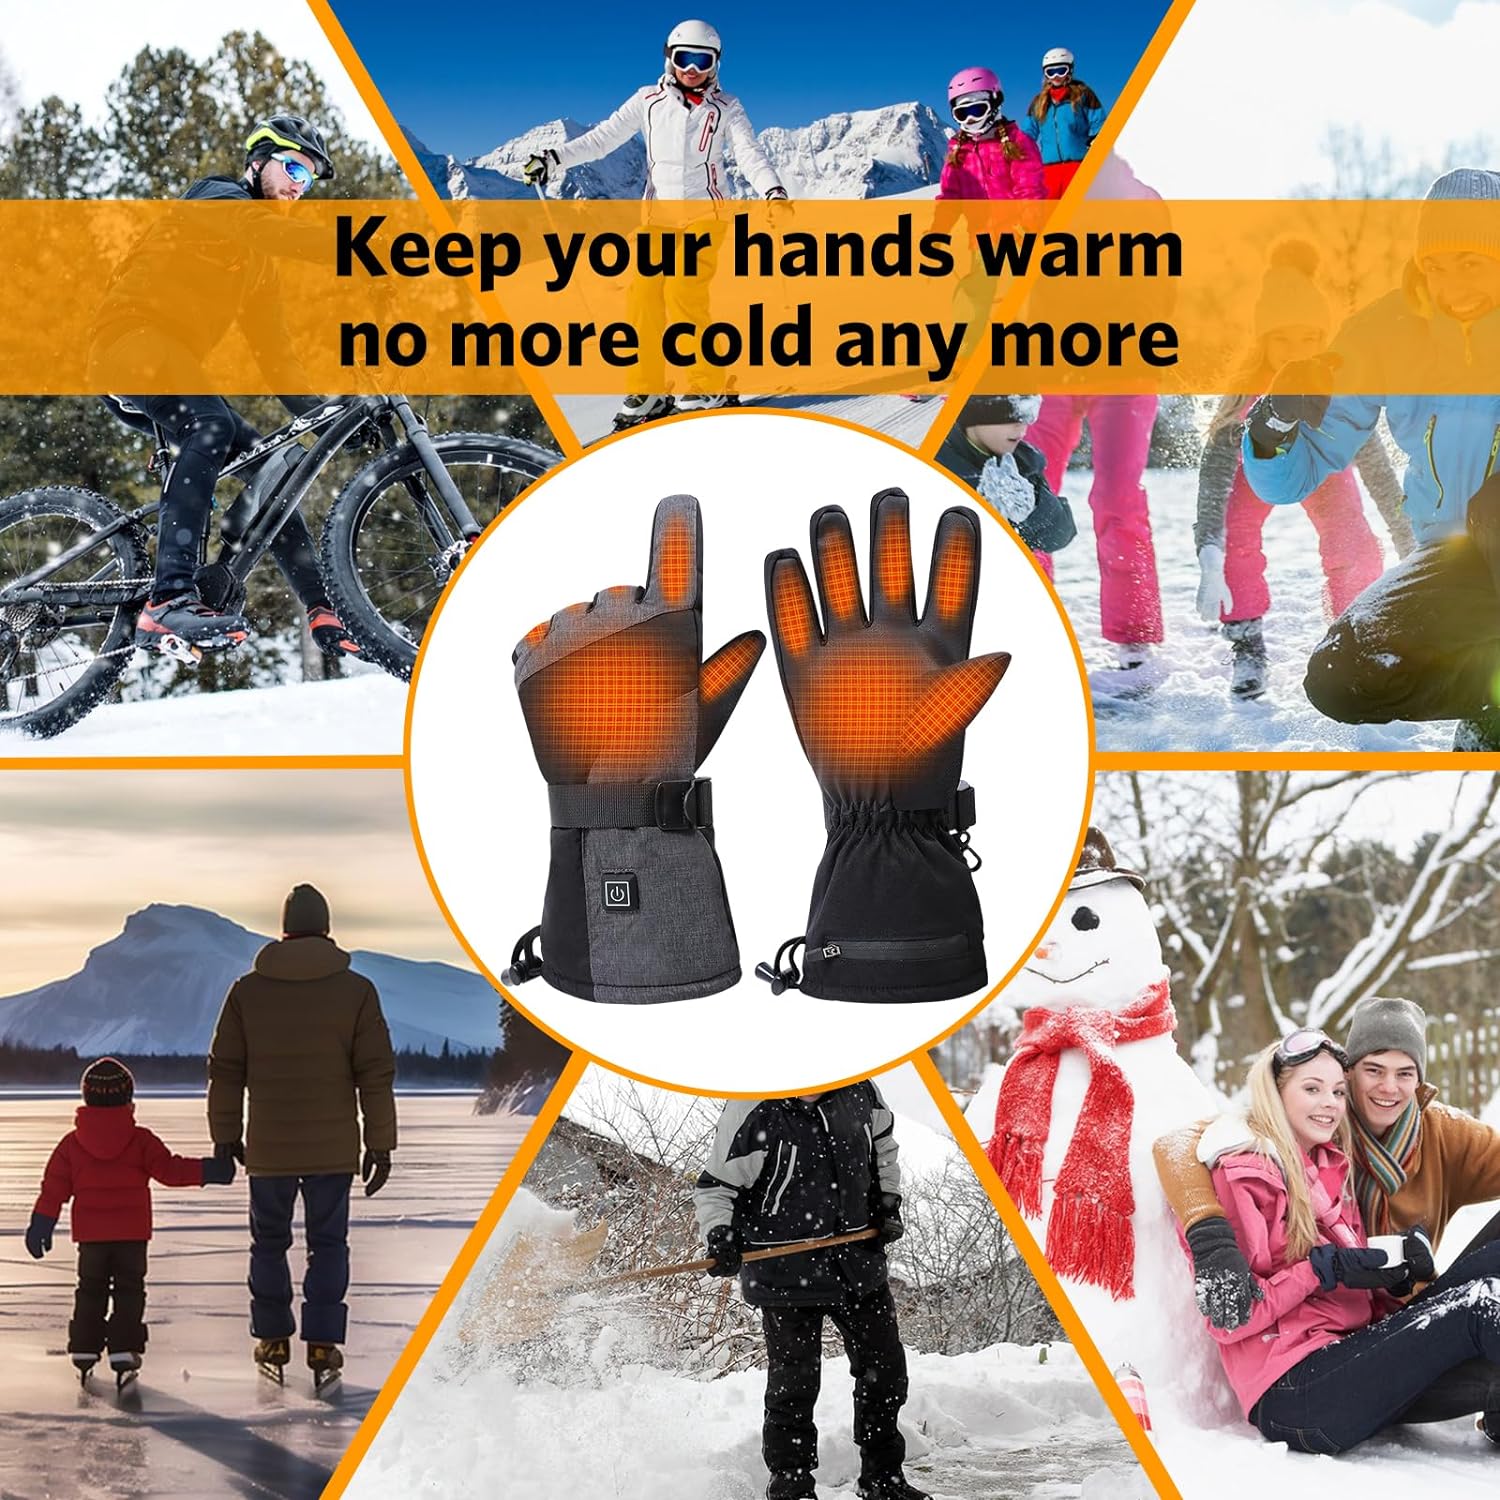 Heated Gloves for Men Women, Battery Powered Heated Gloves, Waterproof Touchscreen Winter Electric Hand Warmer Gloves for Cycling Skiing (Battery Not Included)